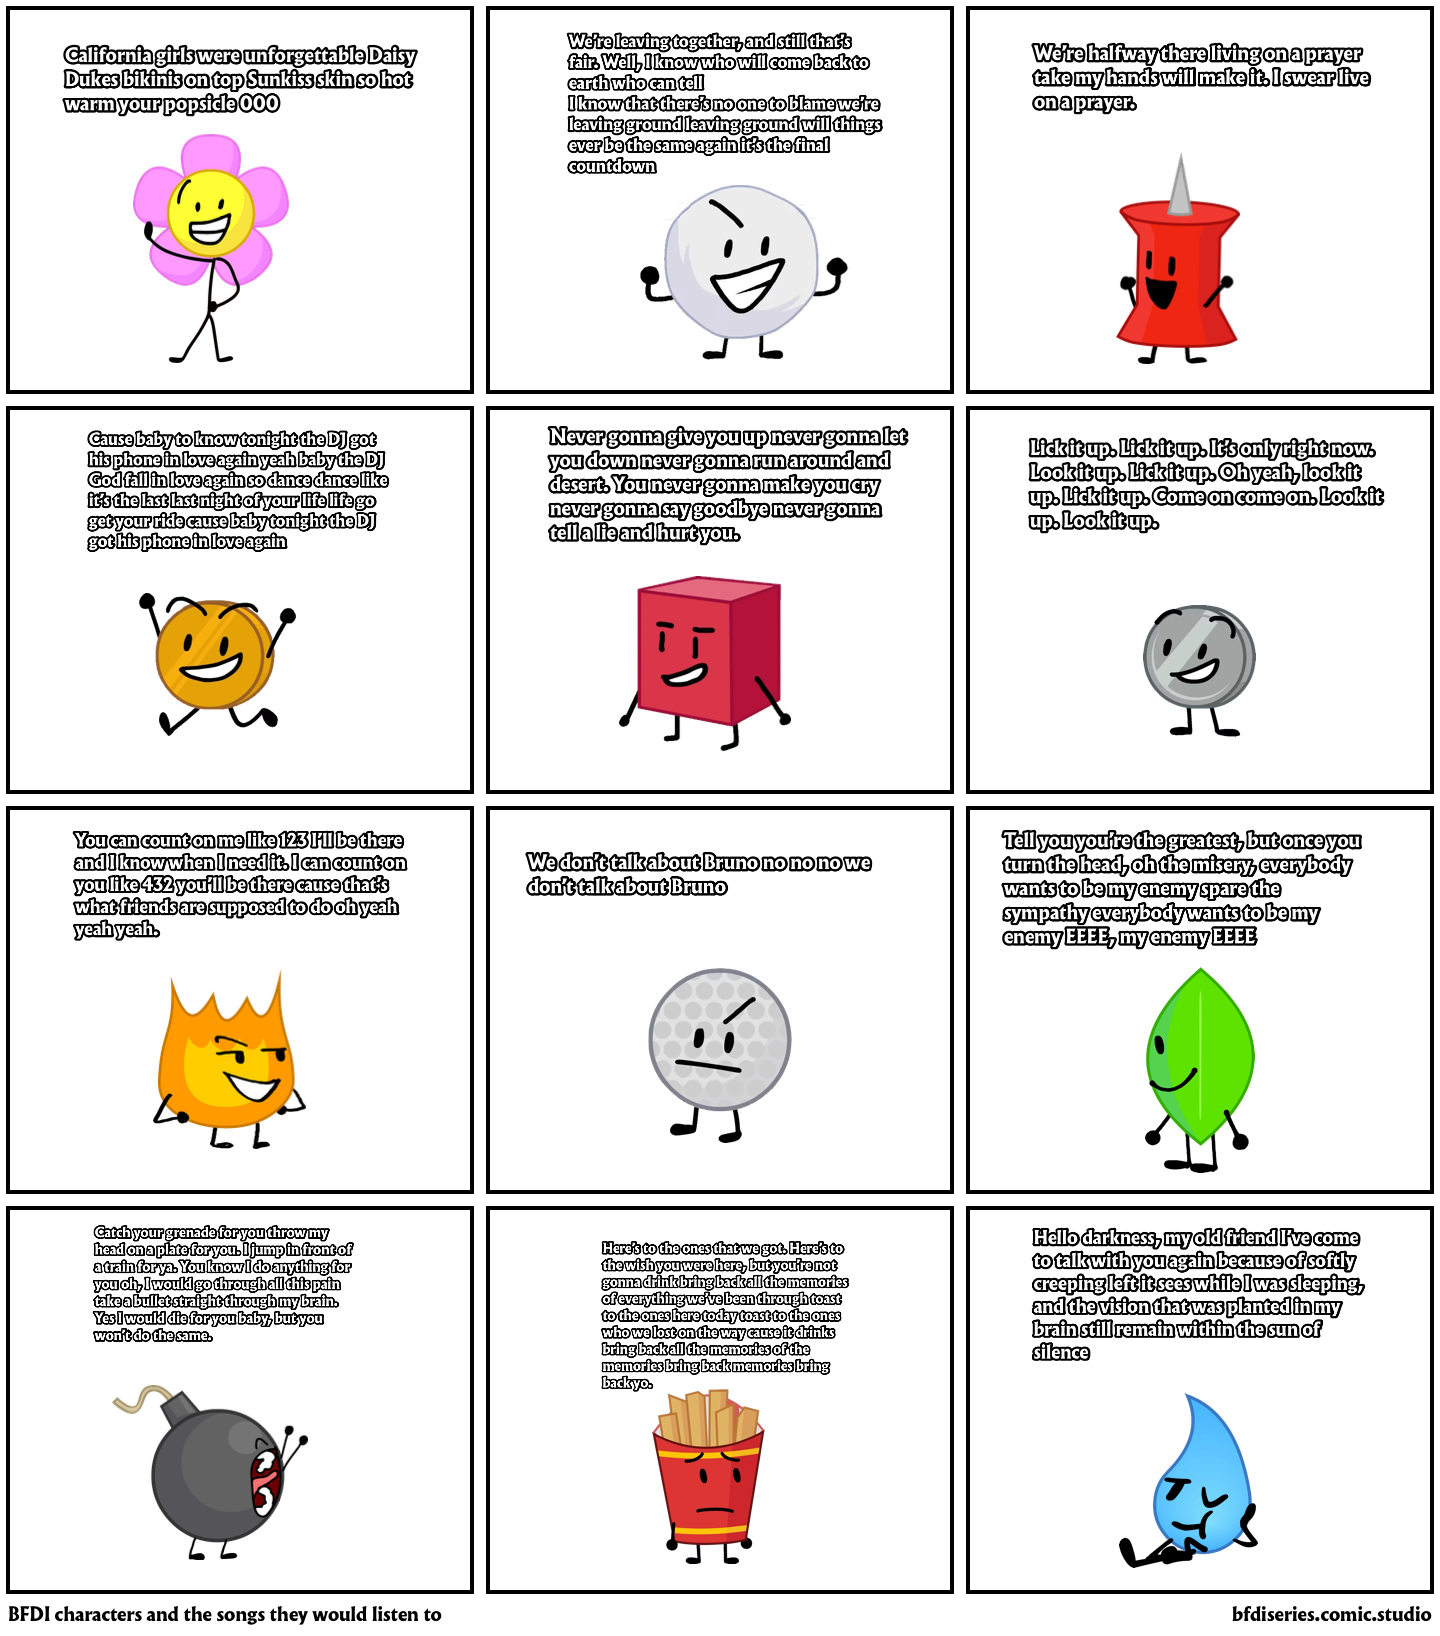 Bfdi Characters in less than 10 words part 2 - Comic Studio